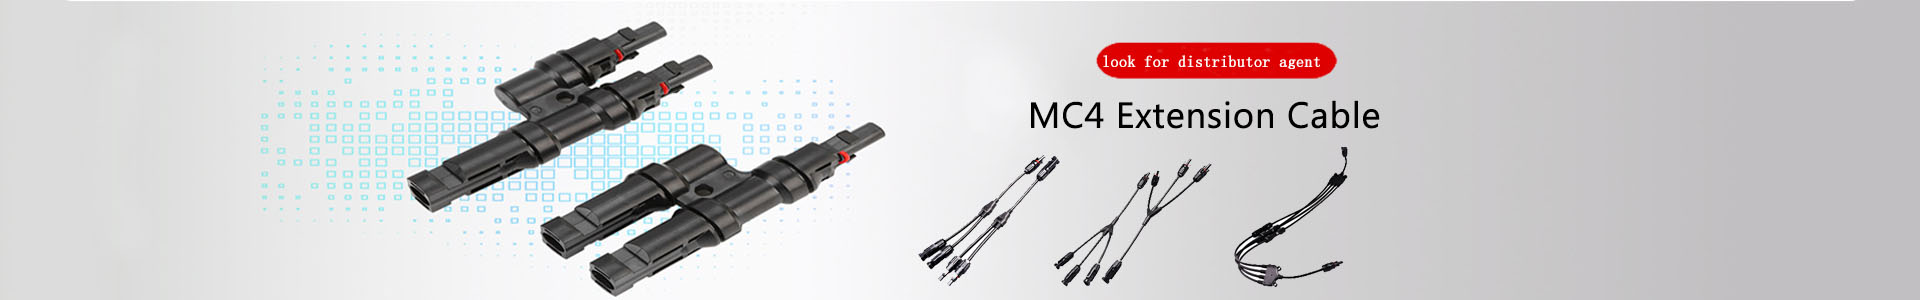 10mw solar power plant project-Solar power plant project-Solar | solar connector,solar branch connector,diode fuse connector,MC4 extnsion cable,H1Z2Z2 solar cable, UL4703 solar cable | Leading manufacturer and supplier of solar pv cables and connectors